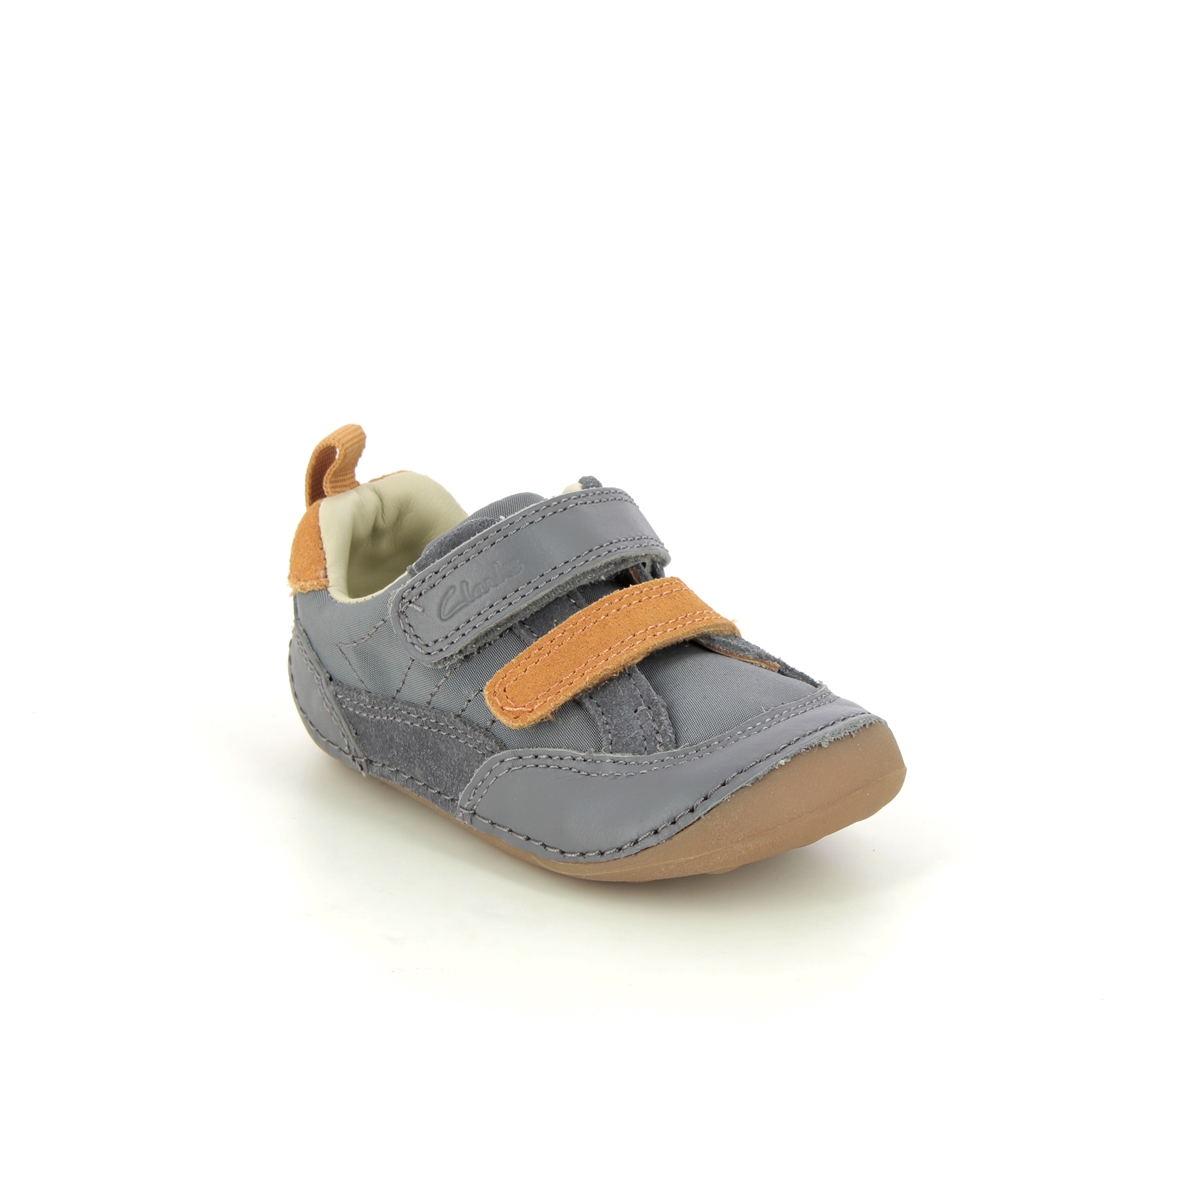 Clarks Tiny Fawn T 2v Grey leather Kids Boys First Shoes 7534-86F in a Plain Leather in Size 4.5